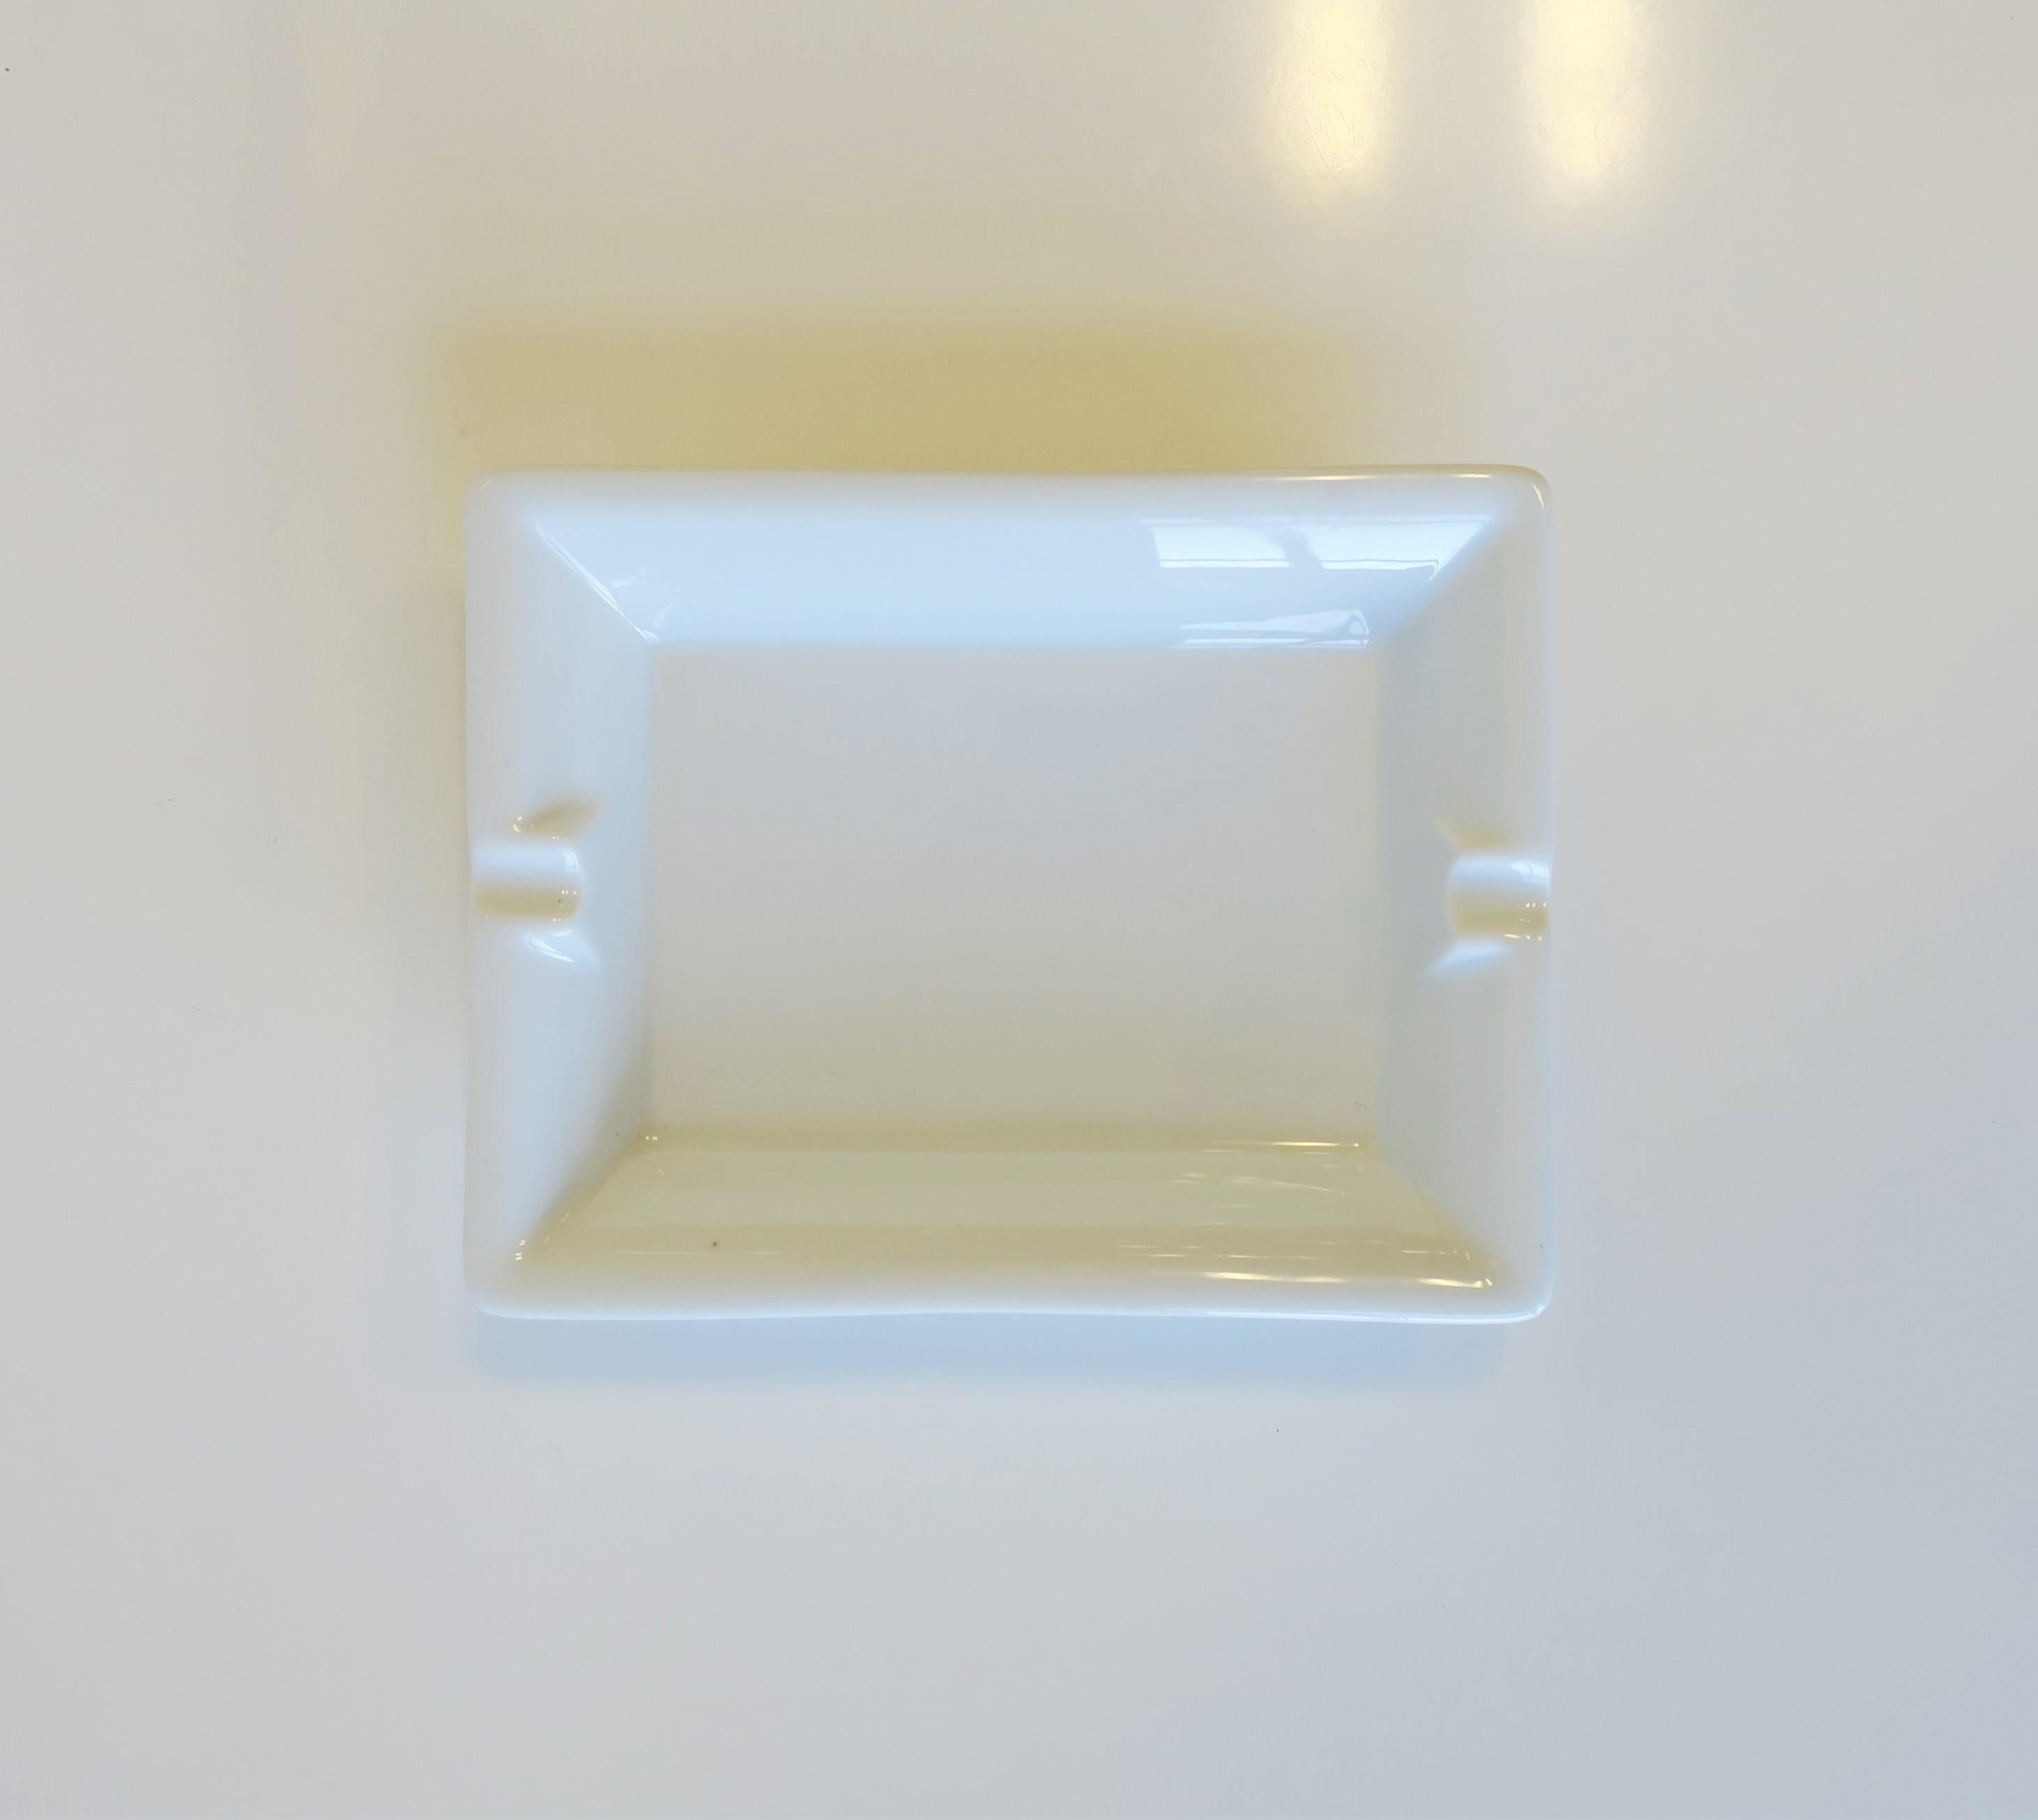 A French white porcelain tray vide-poche (catch-all) or ashtray, circa mid to late-20th century, France. A great standalone piece or tray to hold jewelry (as demonstrated) or other items on desk, vanity, nightstand, end table, etc. Marked on bottom